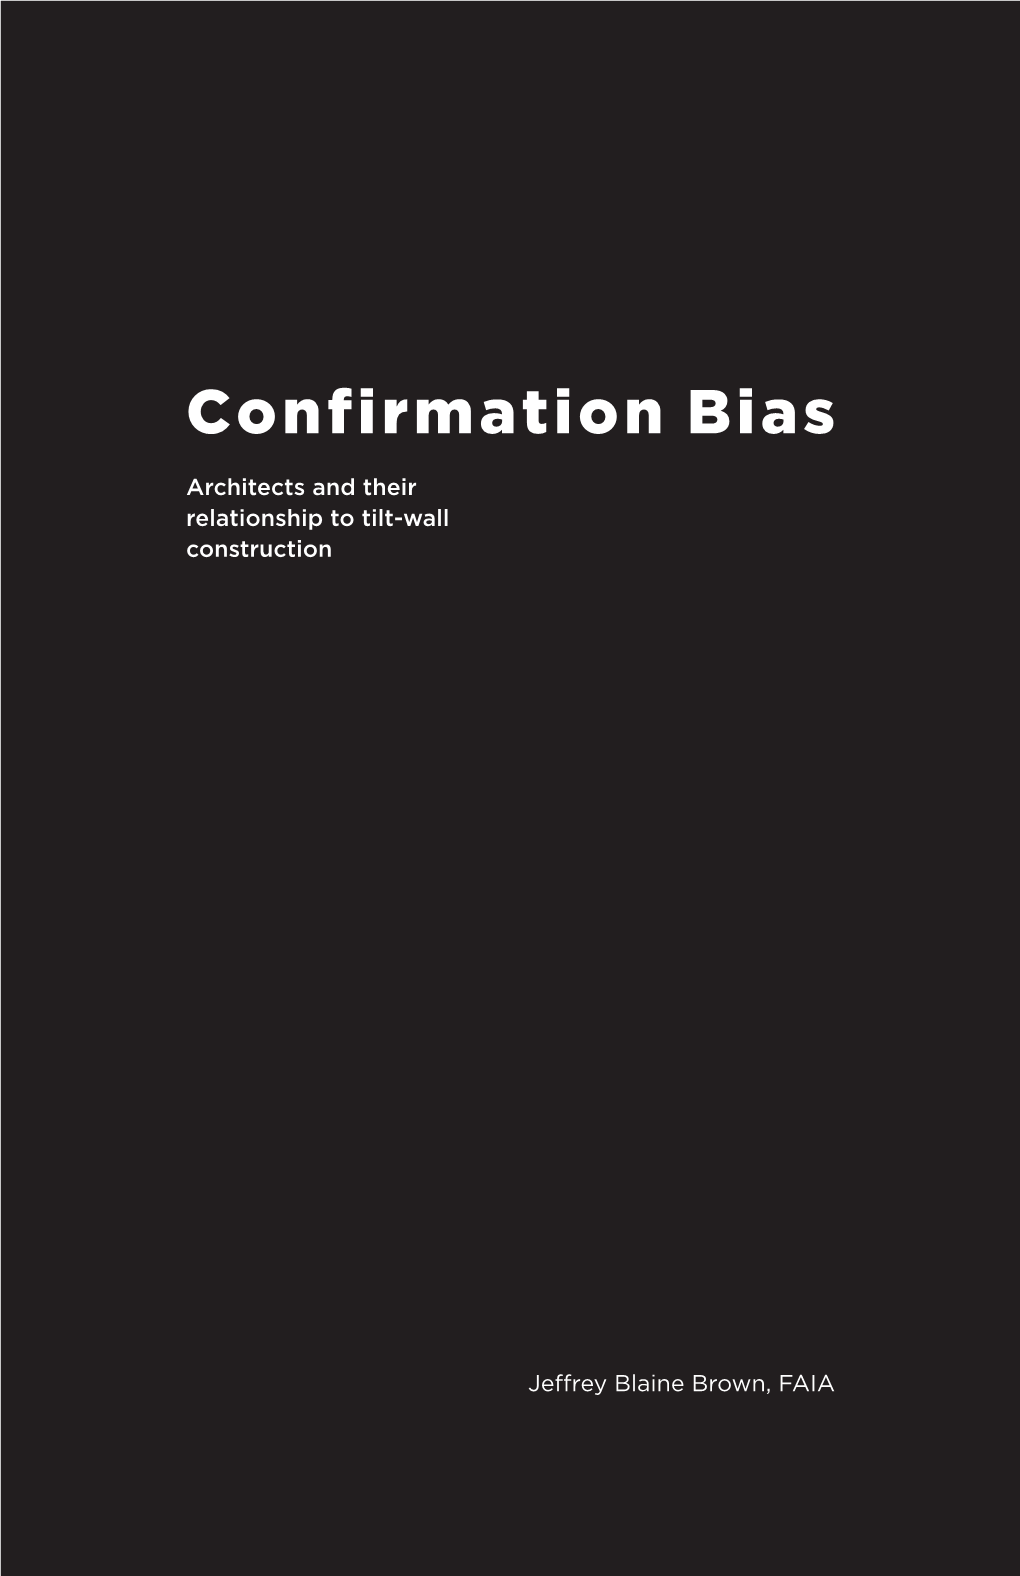 Confirmation Bias: Architects and Their Relationship to Tilt-Wall Construction